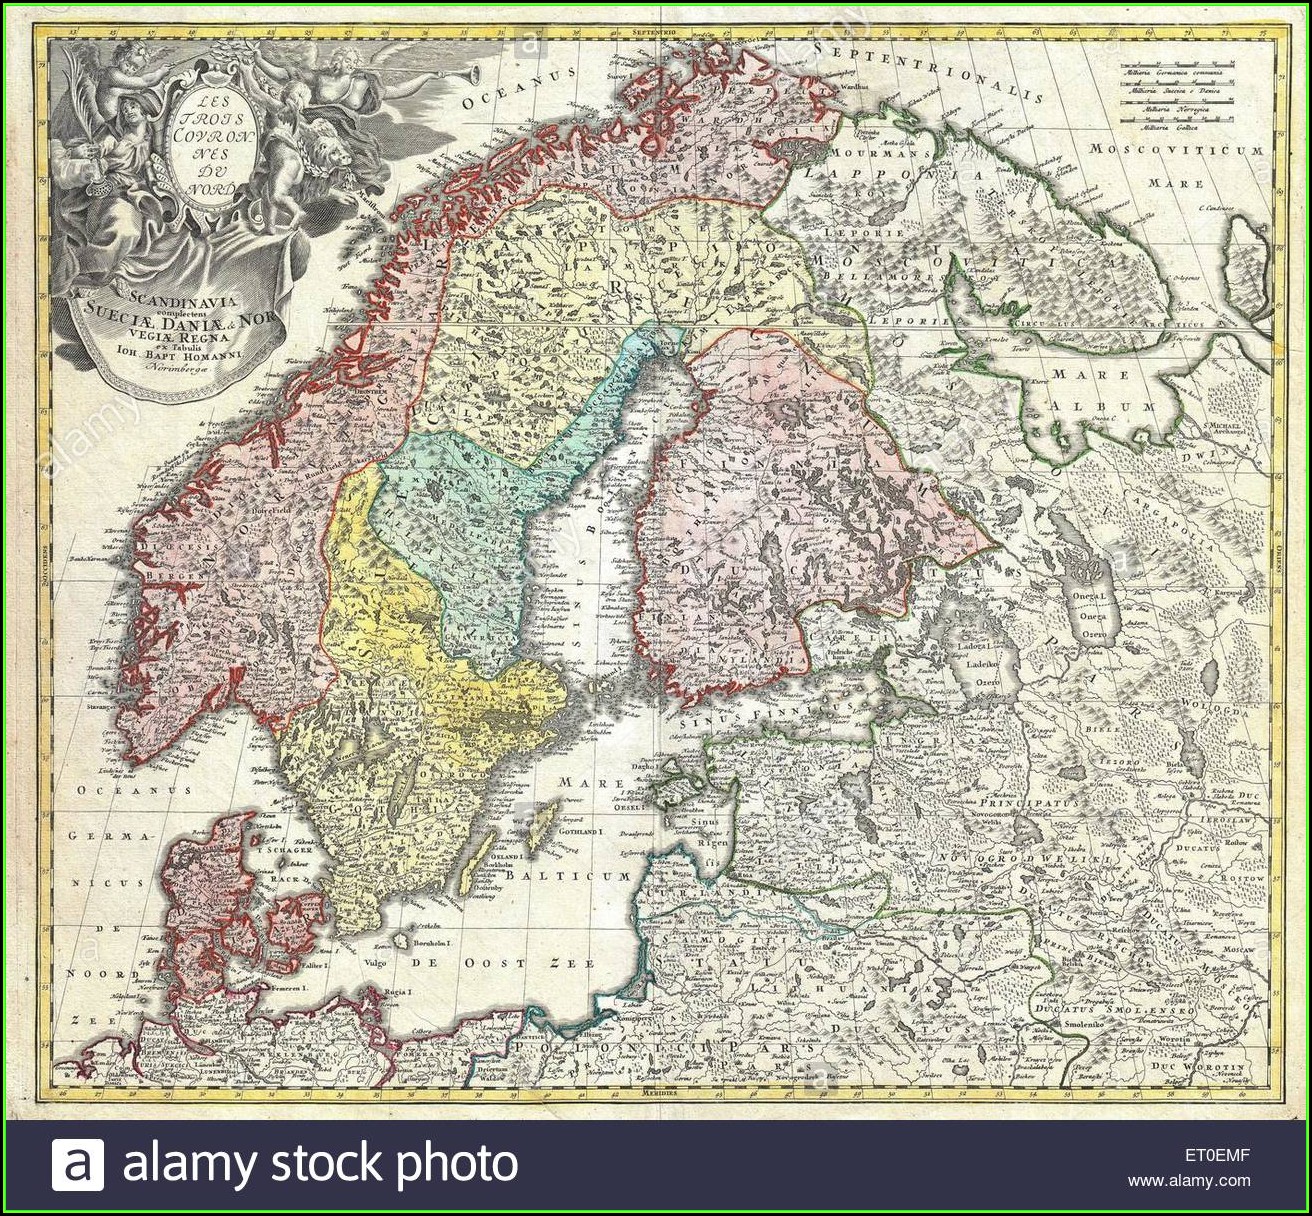 Old Fashioned Map Of Scandinavia